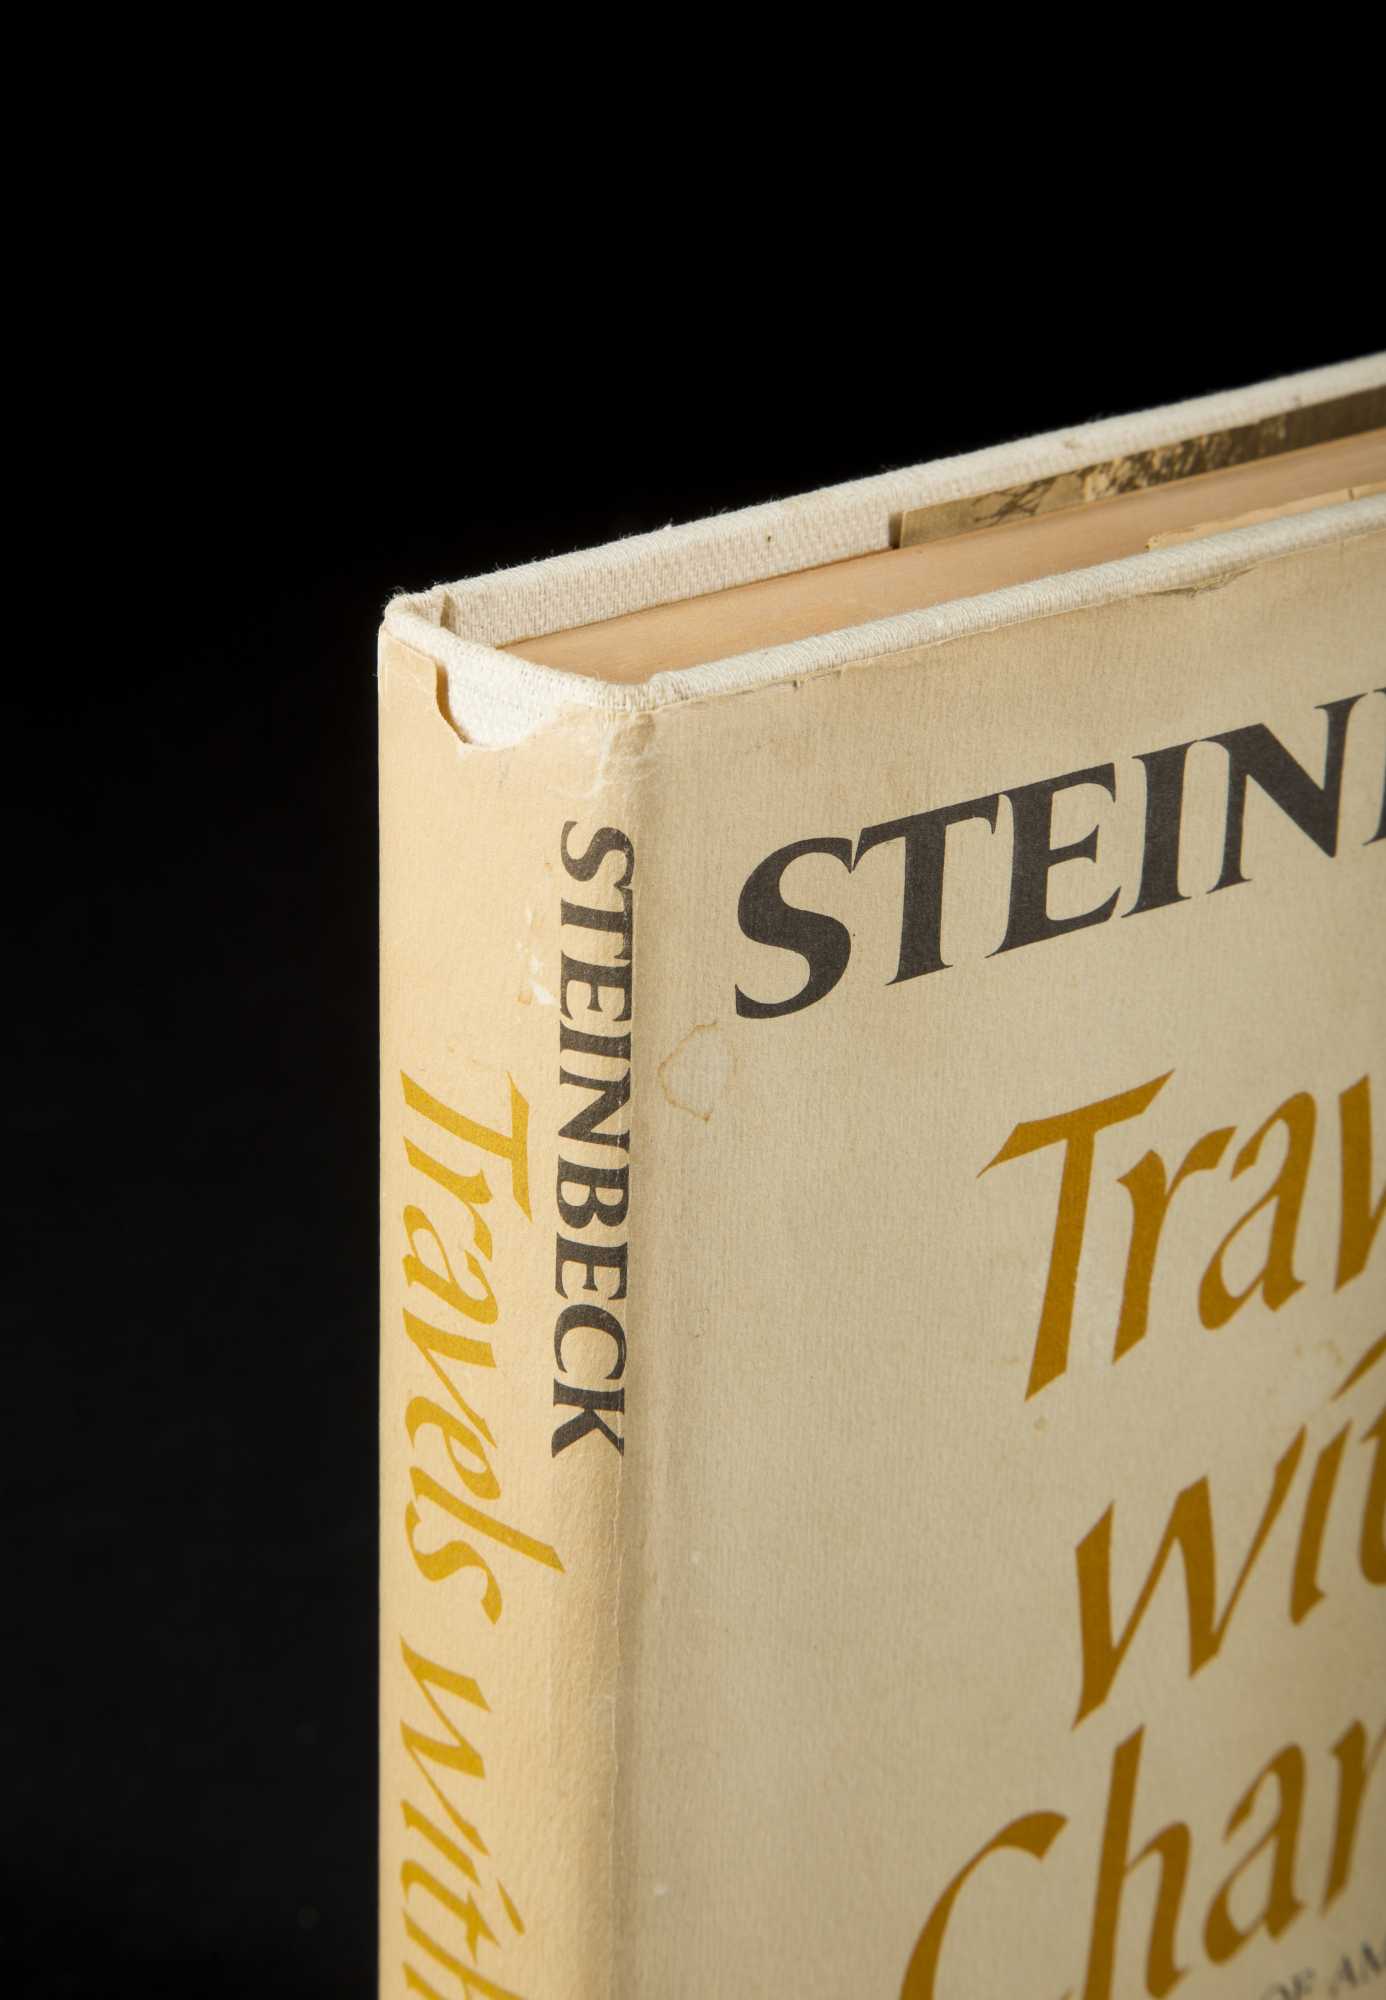 john steinbeck travels with